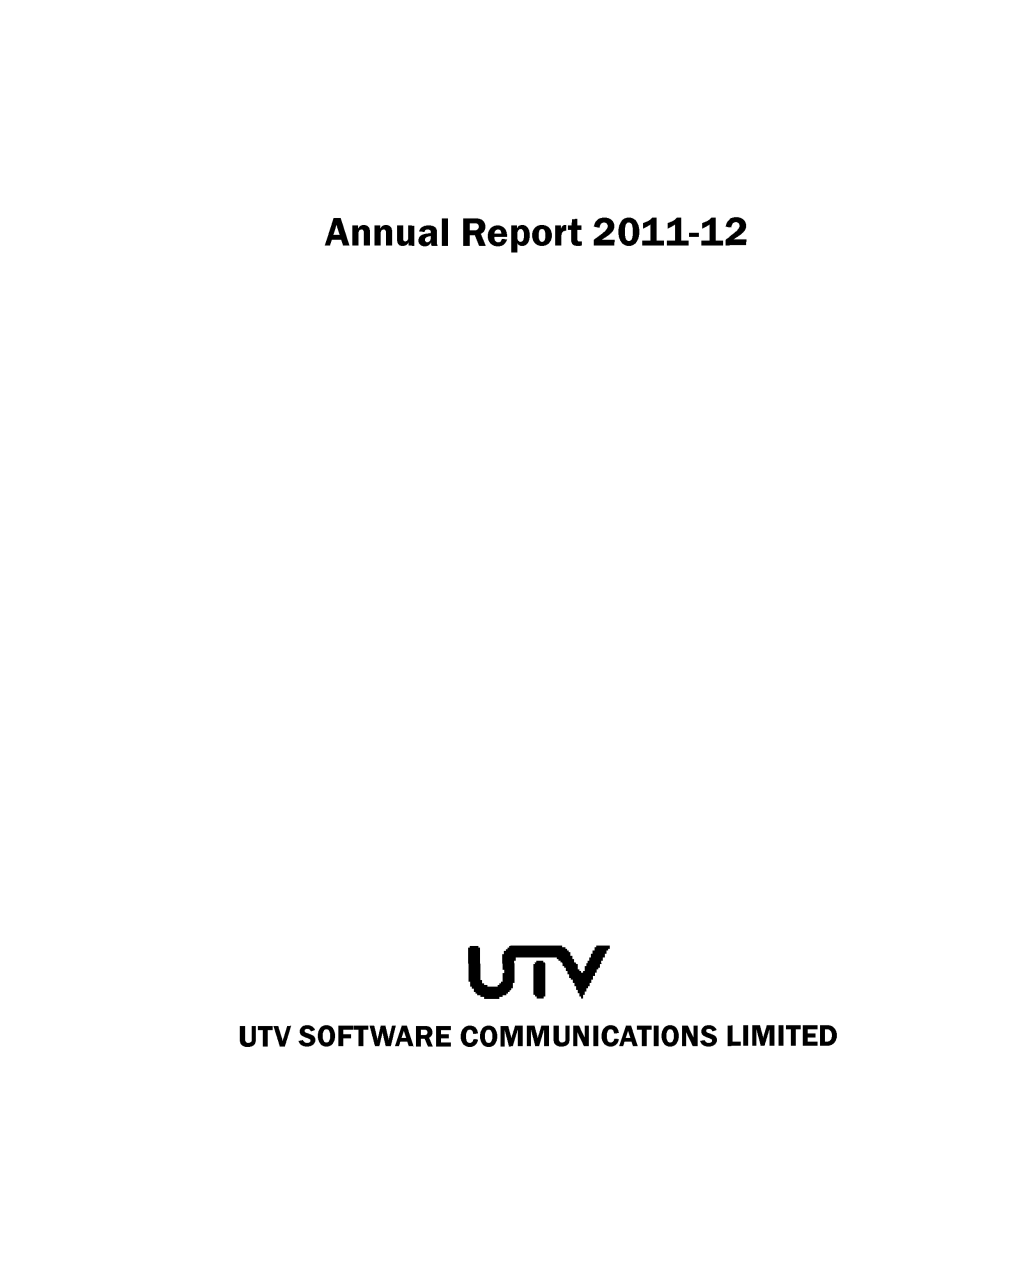 Utv Software Communications Limited Annual Report of Utv Software Communications Limited for Financial Year 2011-2012 Contents